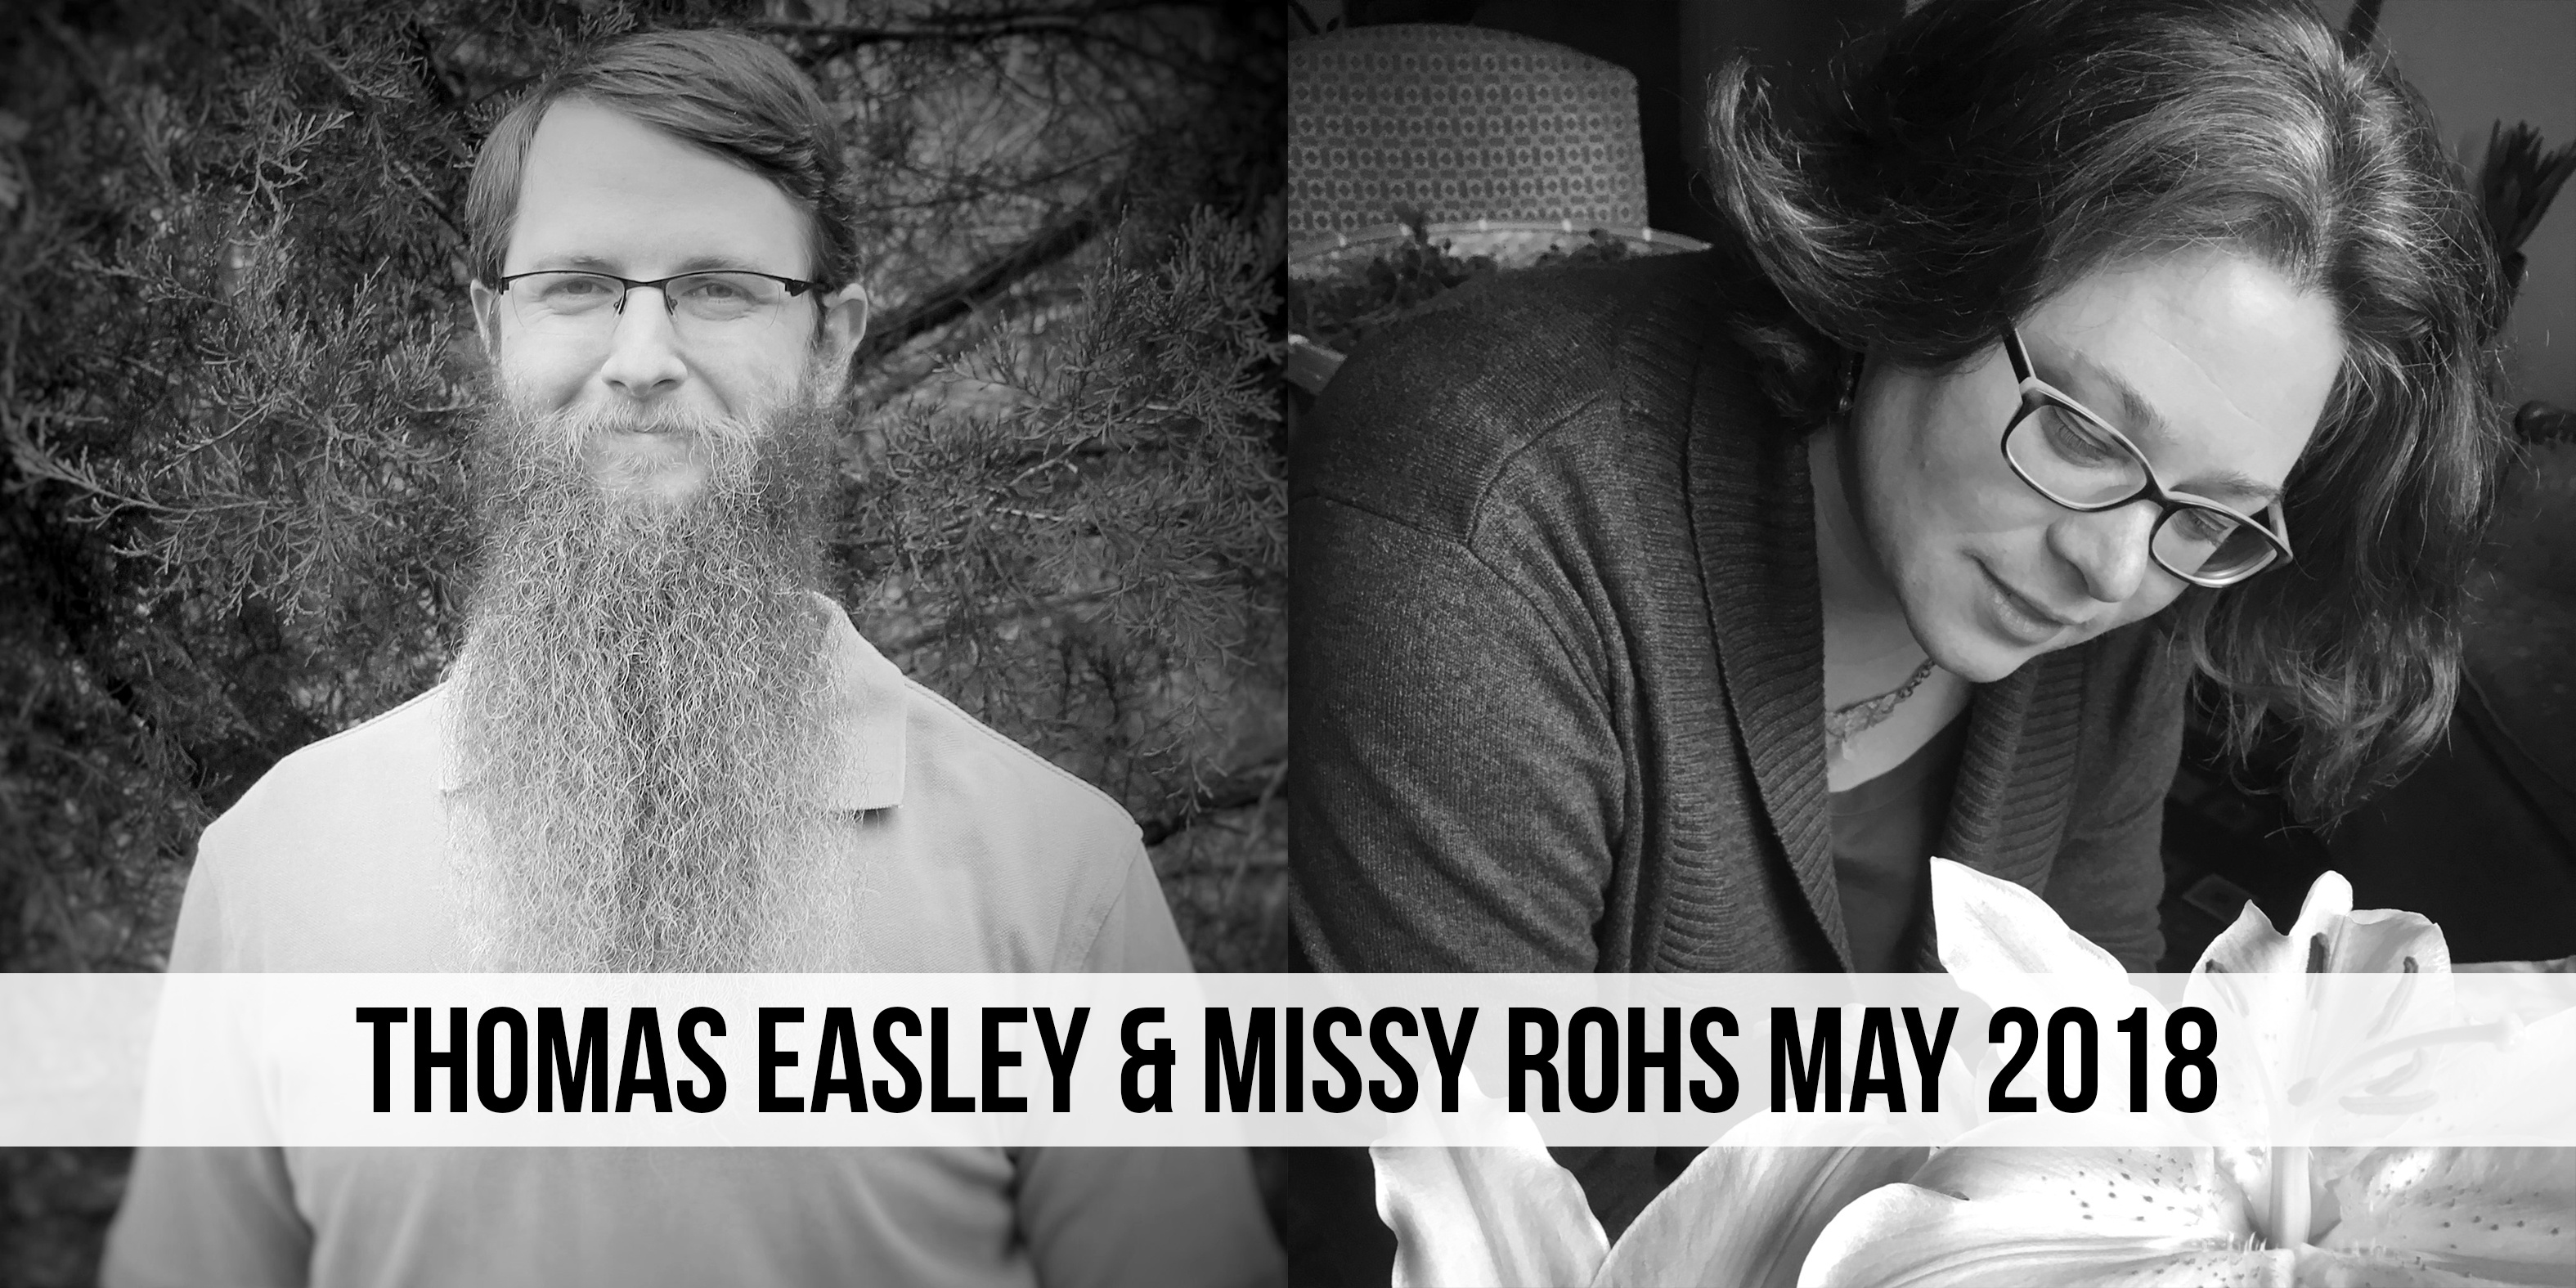 Thomas Easley and Missy Rohs